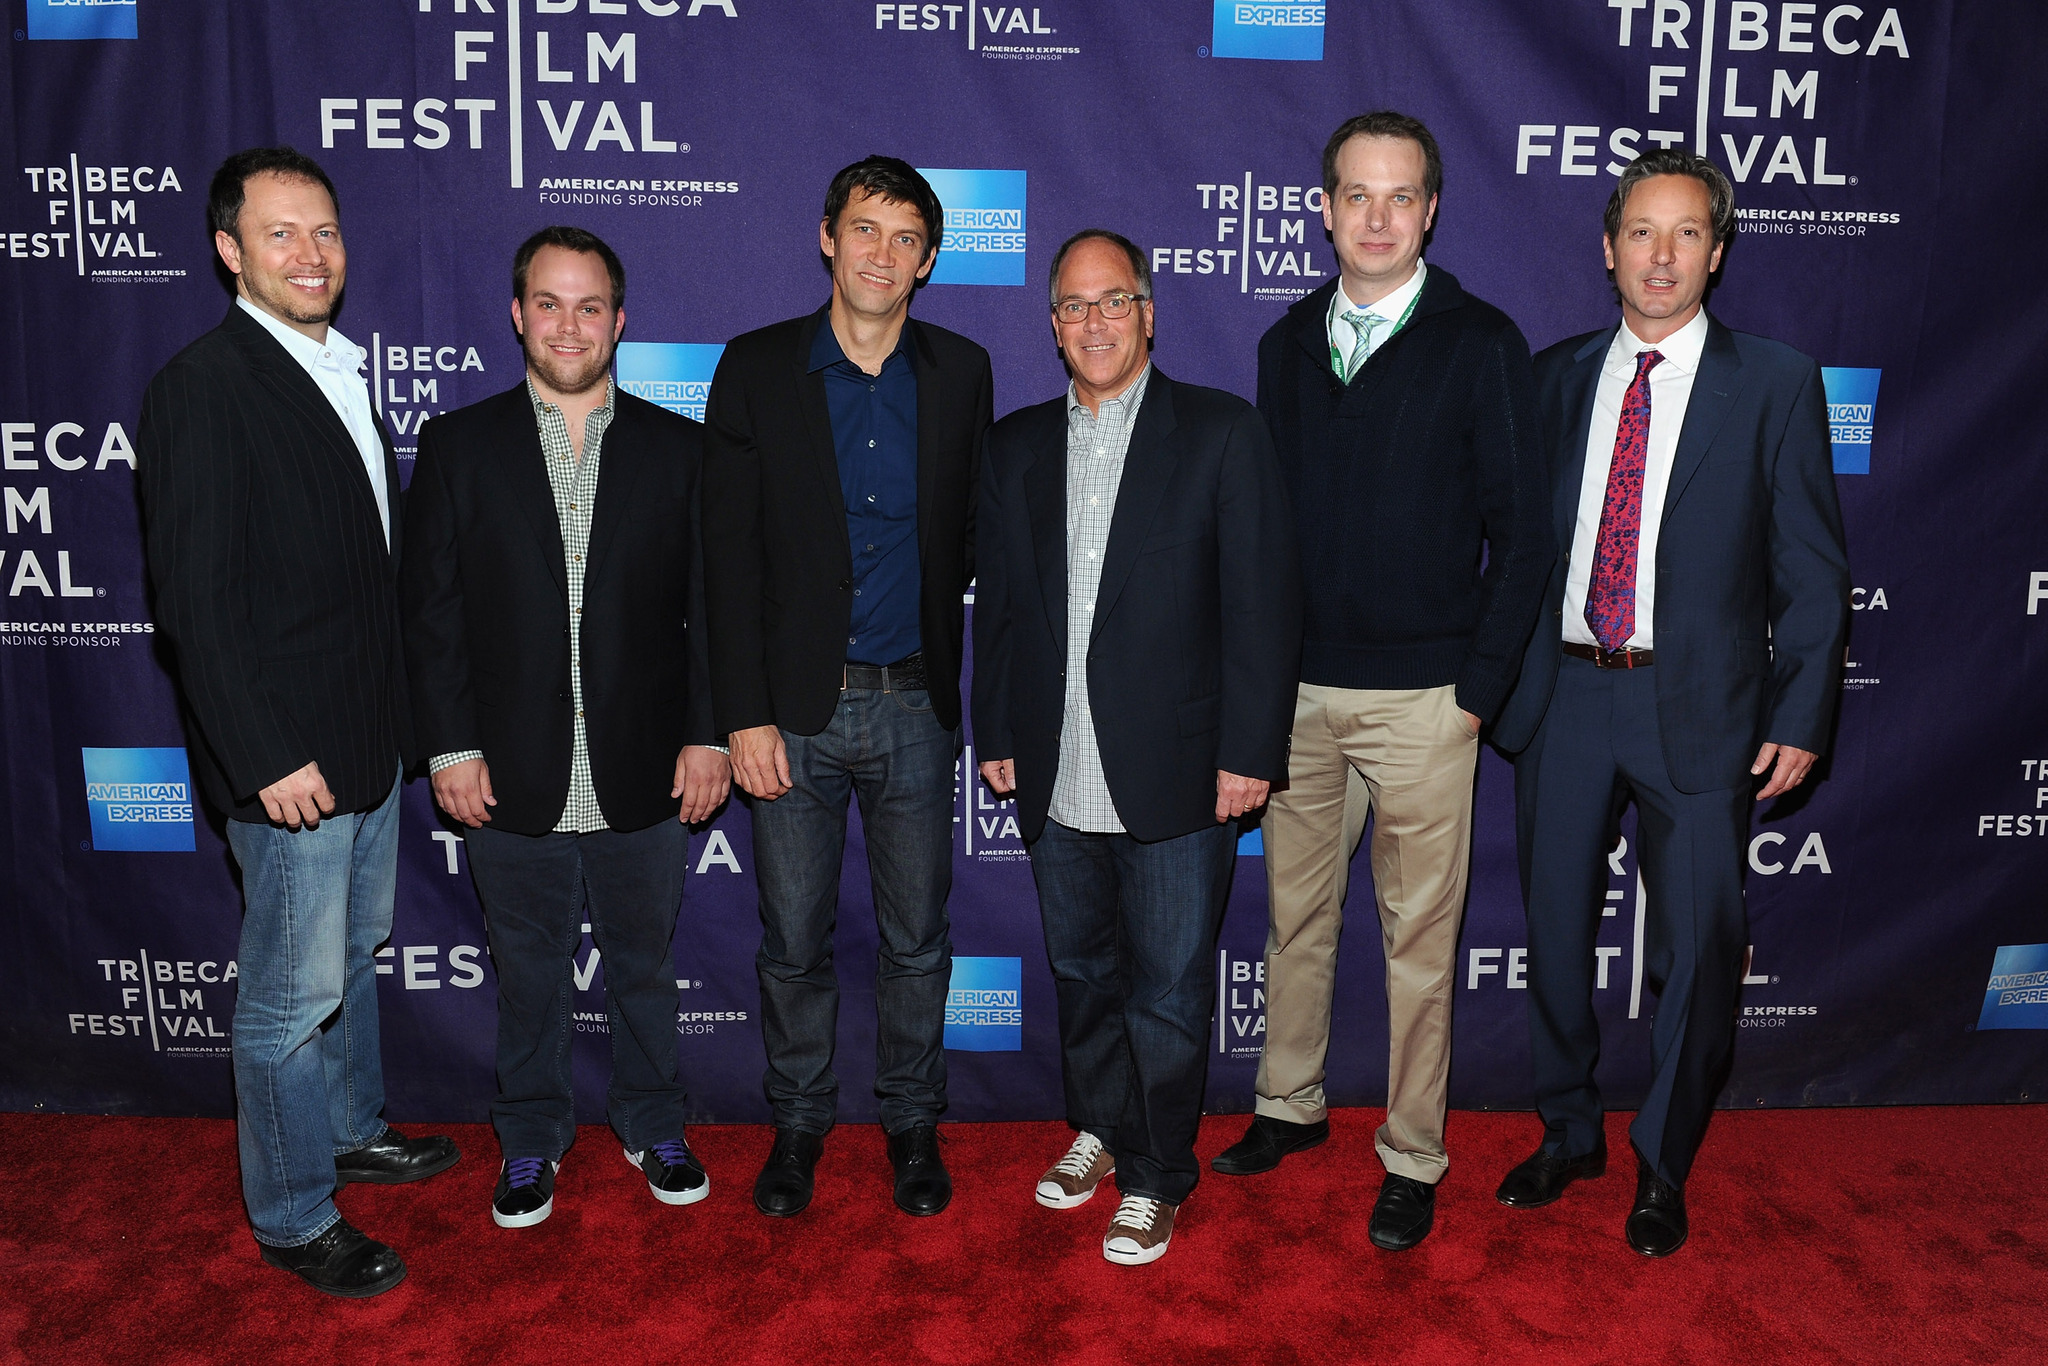 Burr Steers, Nicholas D. Wrathall, Chad Troutwine, Theodore James, Andrew Kortschak and Walter Kortschak at event of Gore Vidal: The United States of Amnesia (2013)